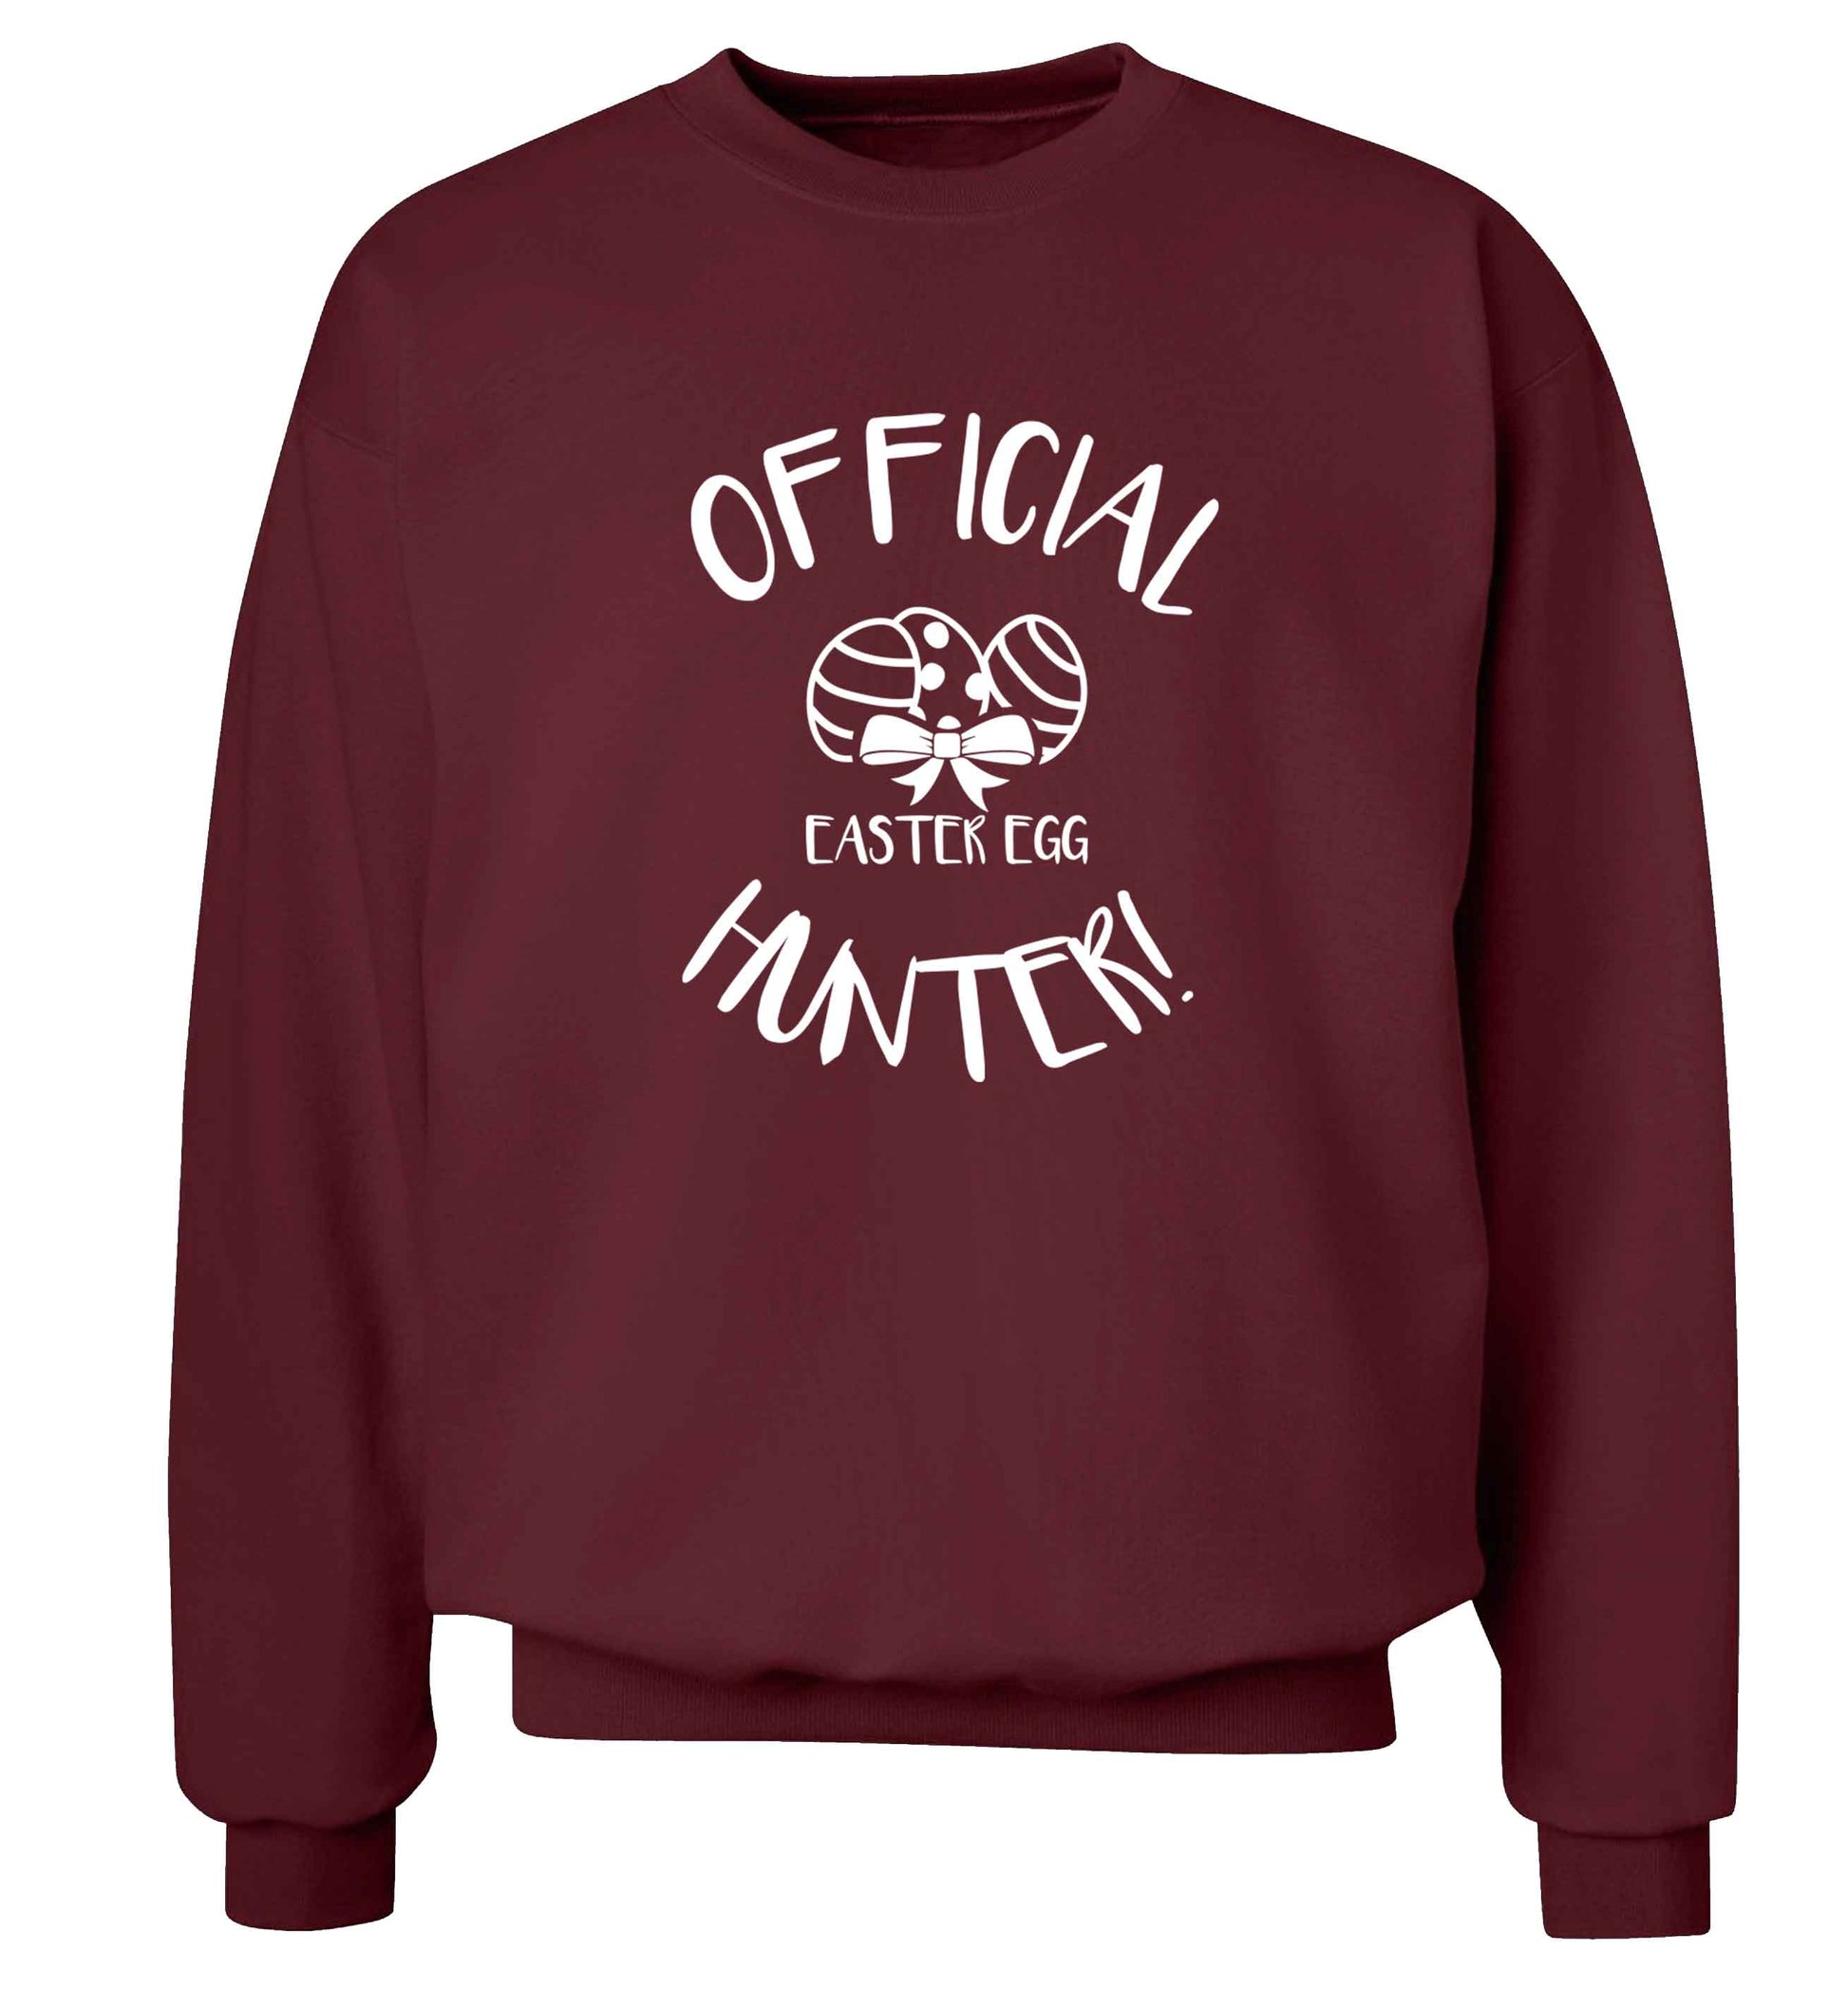 Official Easter egg hunter! adult's unisex maroon sweater 2XL